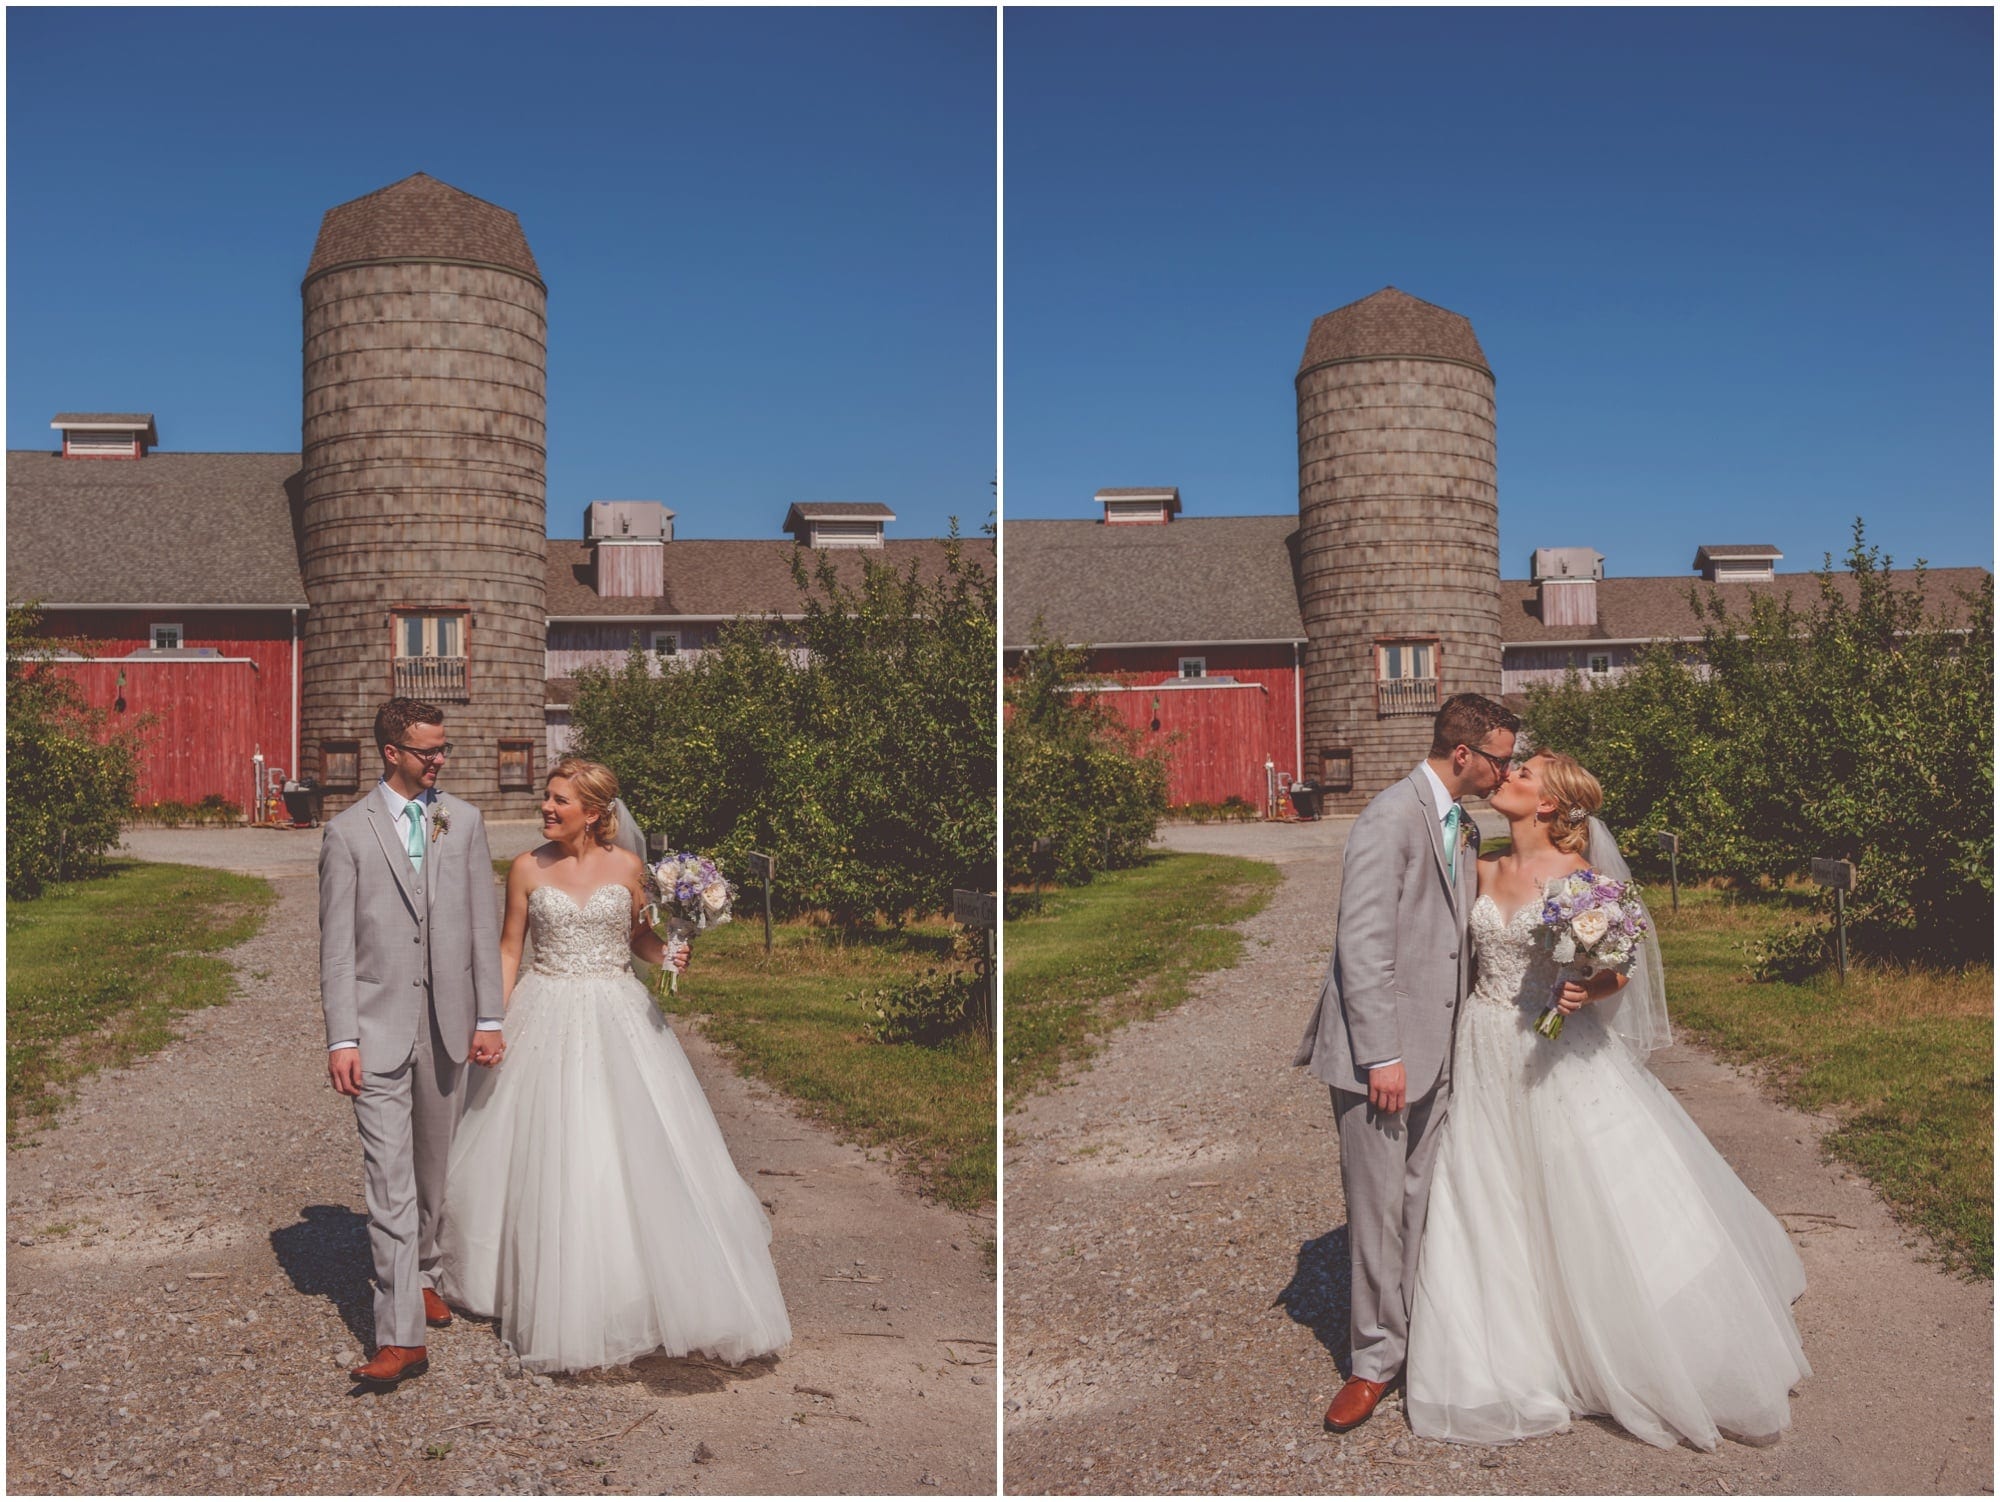 County Line Orchard Wedding Photographer bride and groom walking with barn and silo behind them on wedding day